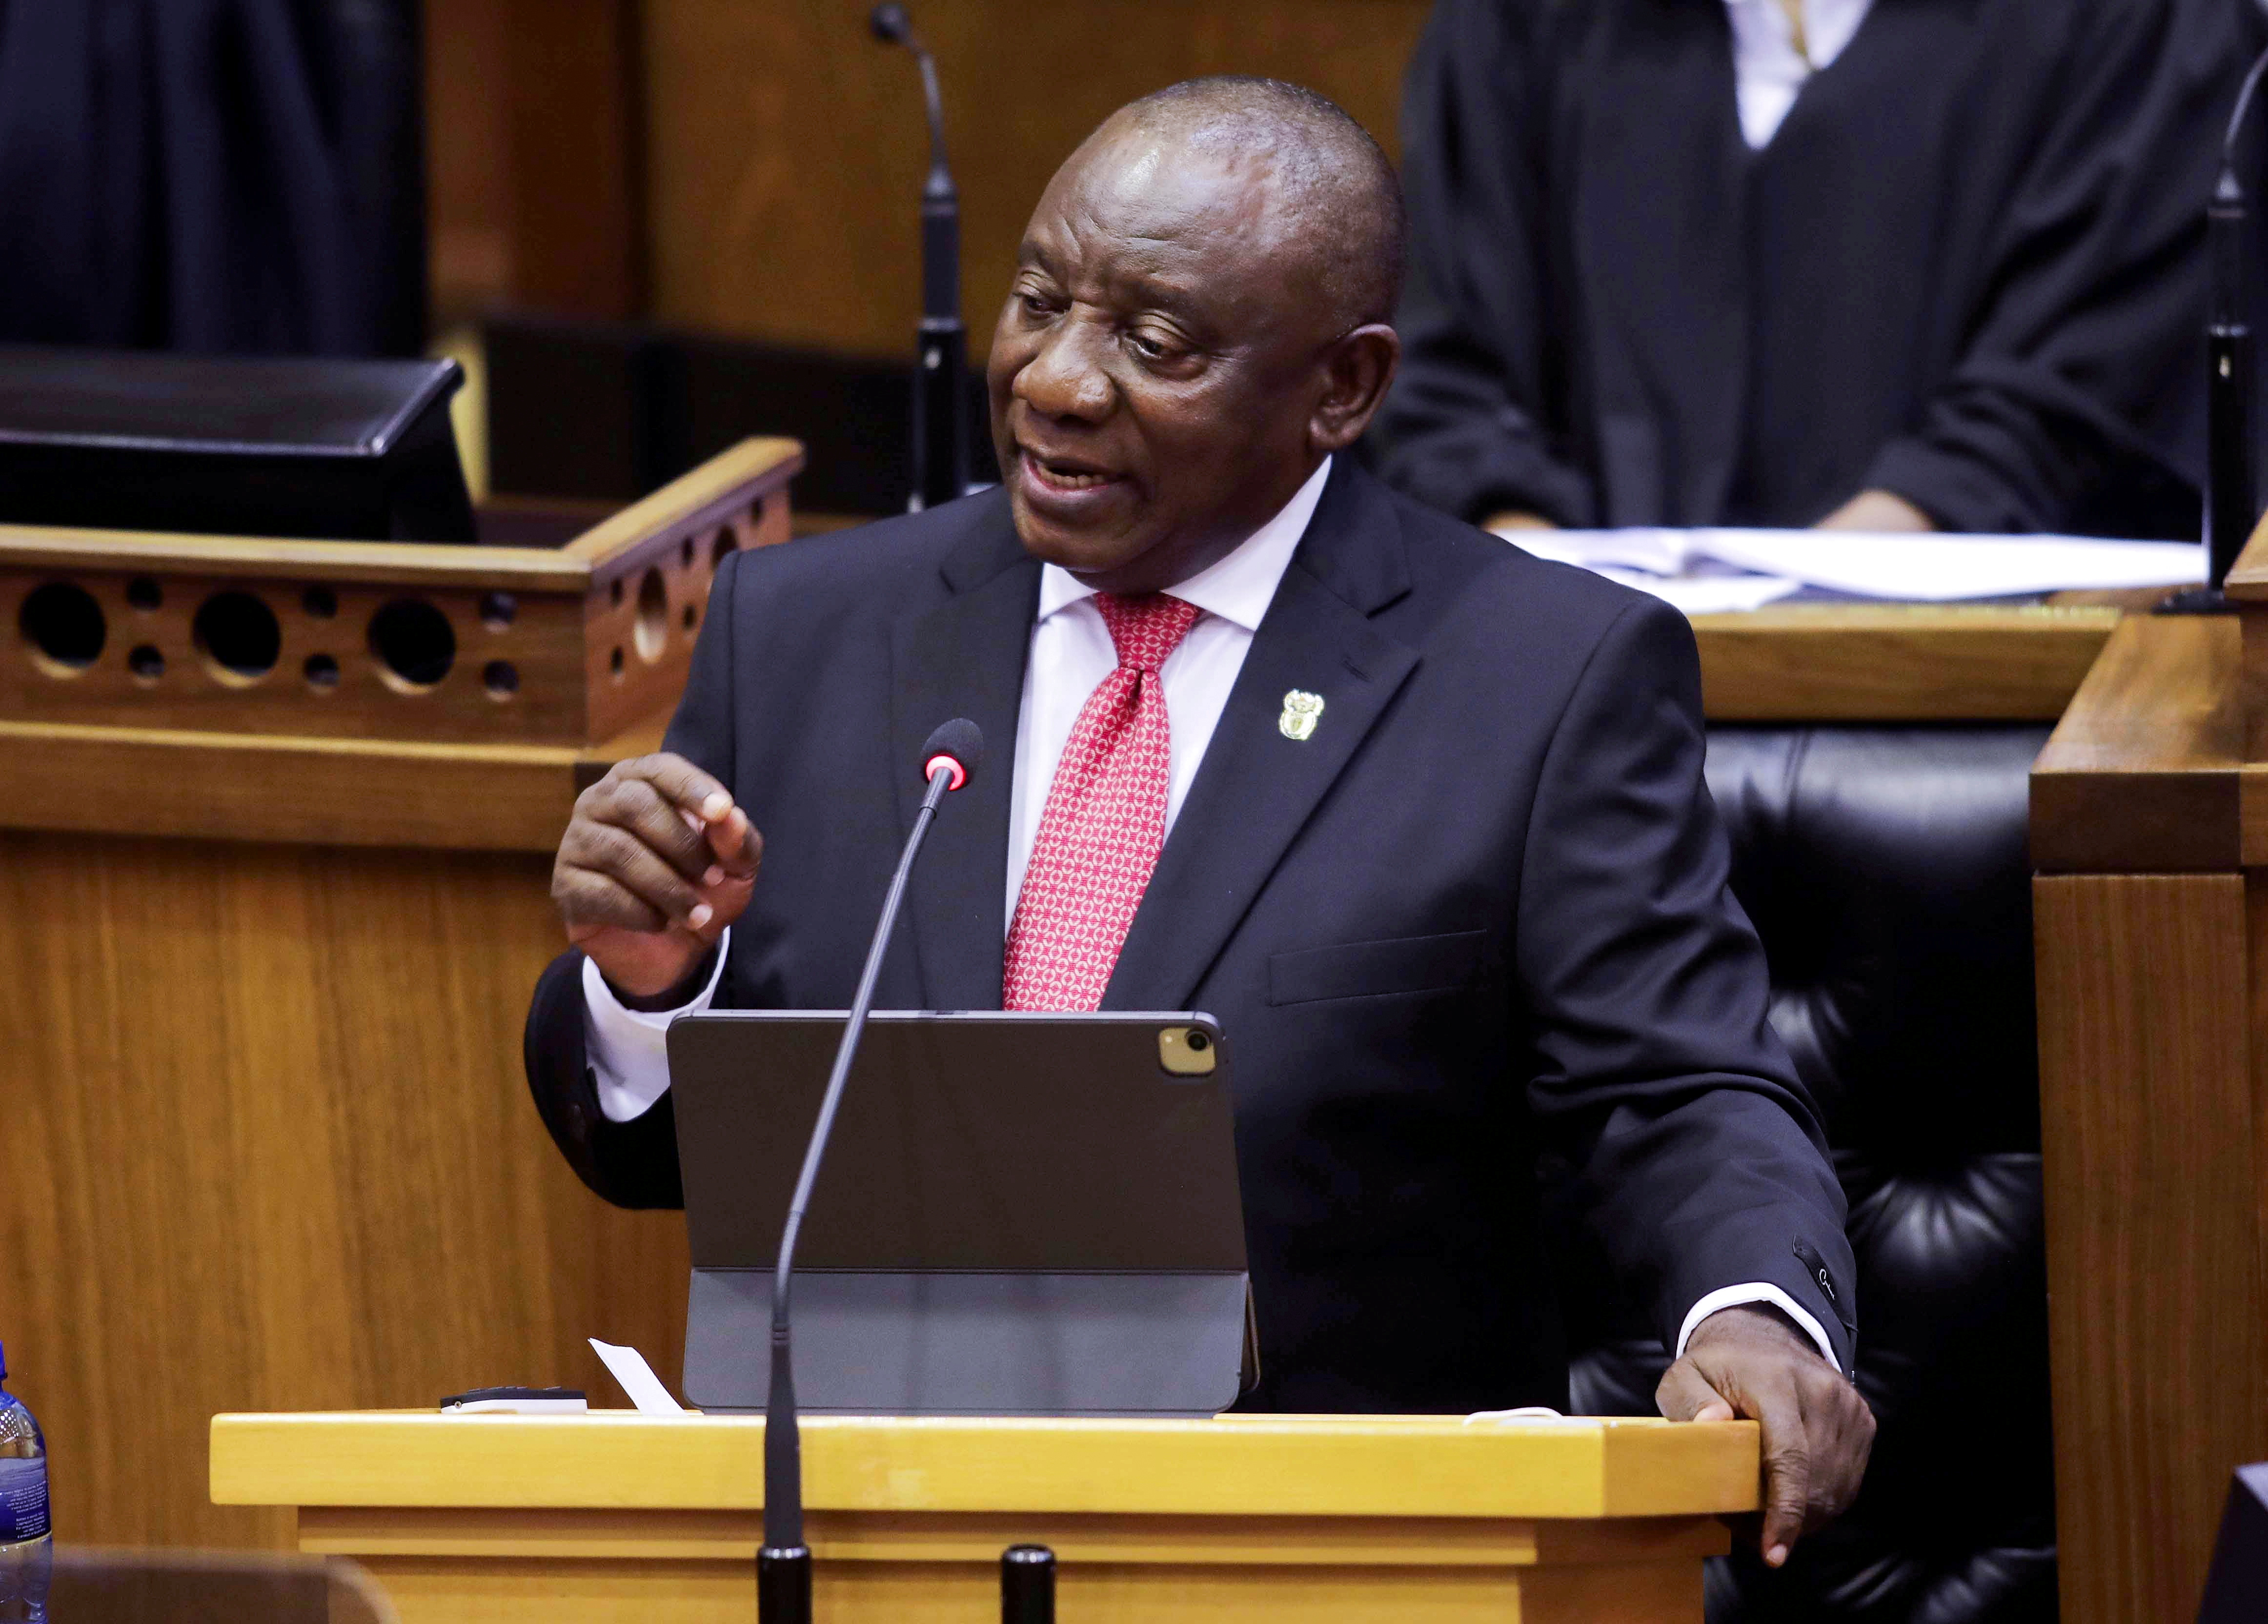 President Cyril Ramaphosa delivers his State of the Nation address in parliament in Cape Town